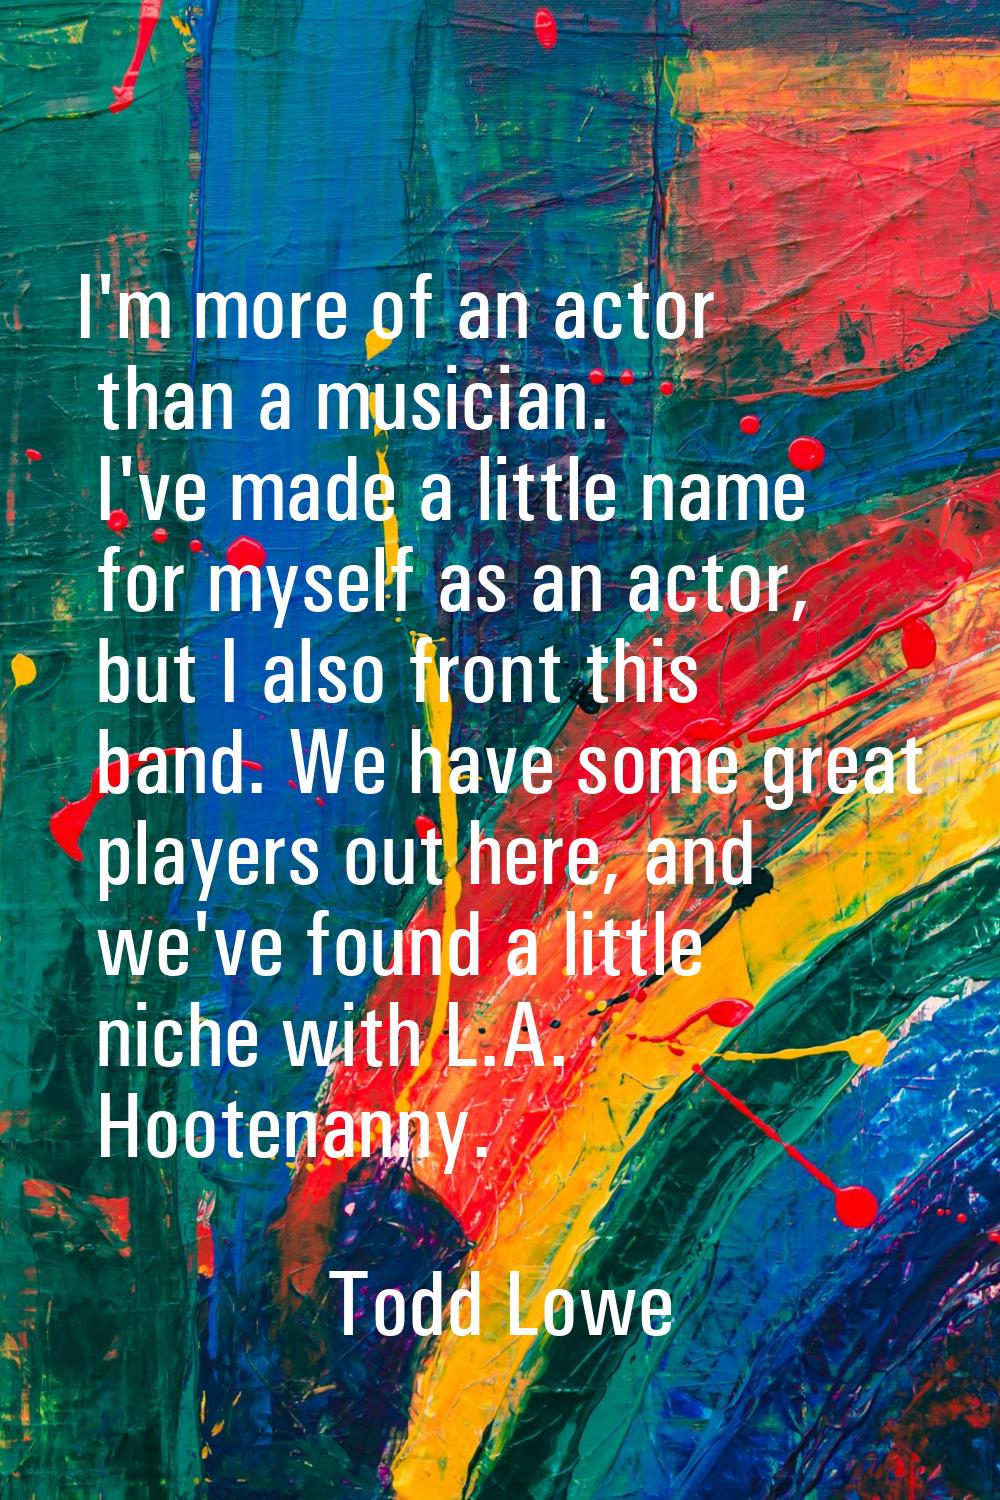 I'm more of an actor than a musician. I've made a little name for myself as an actor, but I also fr